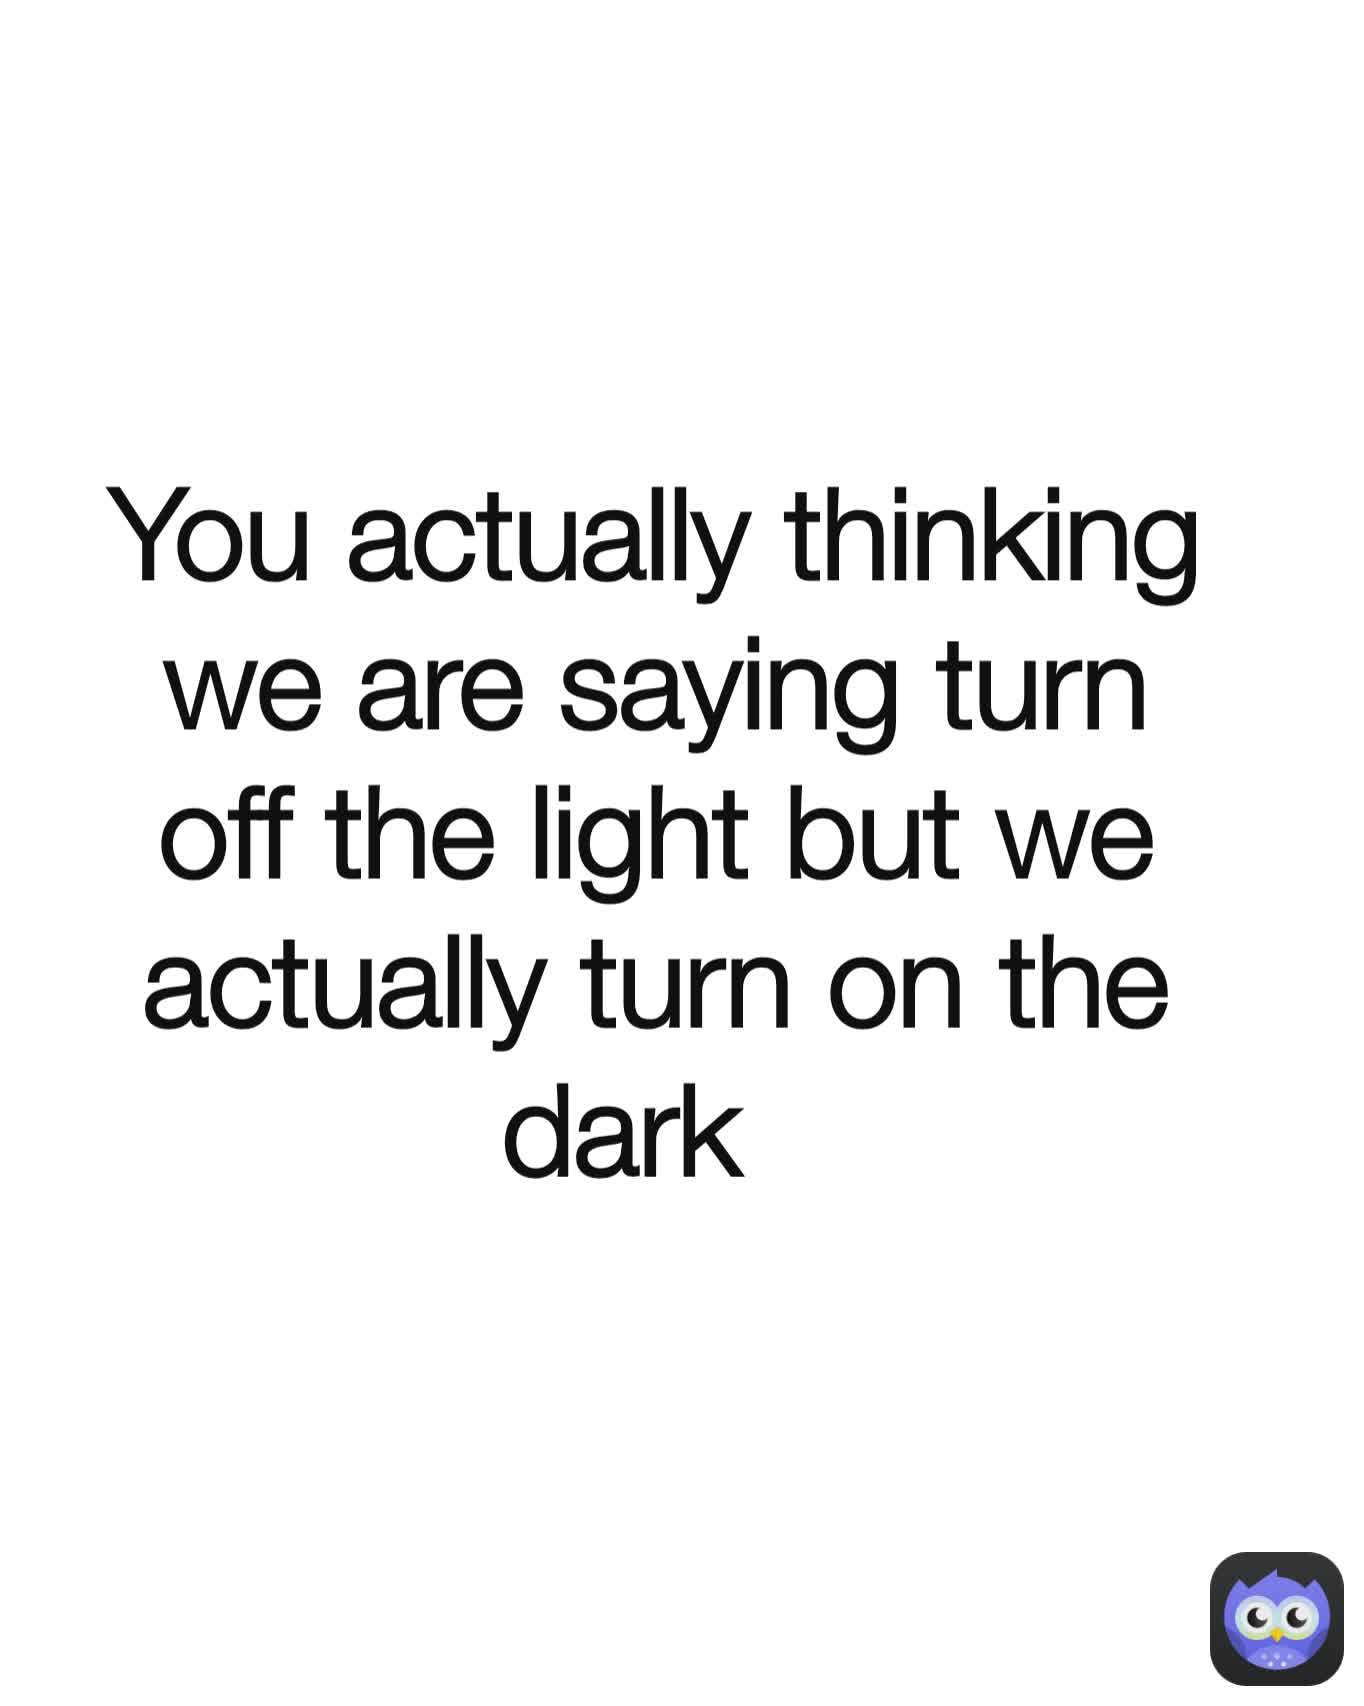 You actually thinking we are saying turn off the light but we actually turn on the dark  